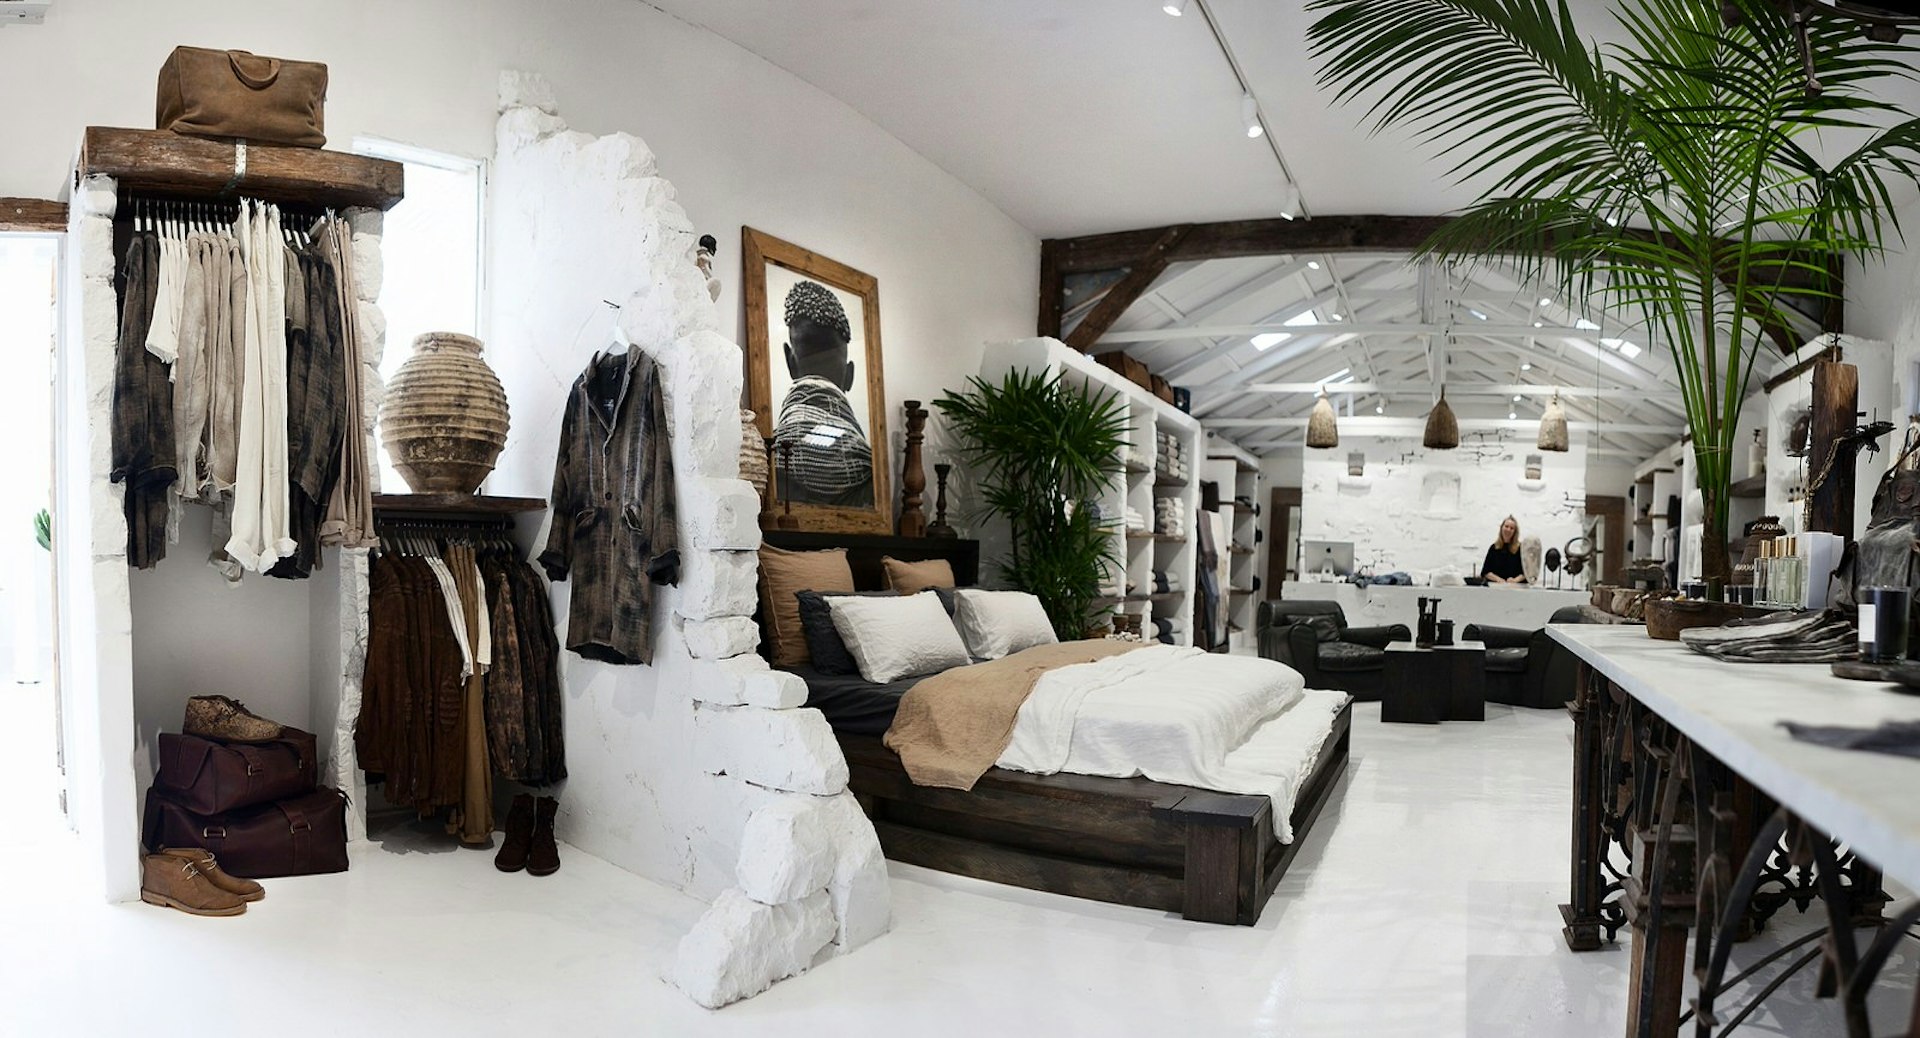 Neutral coloured, bohemian clothes hang in a white washed store also selling earthy homeware